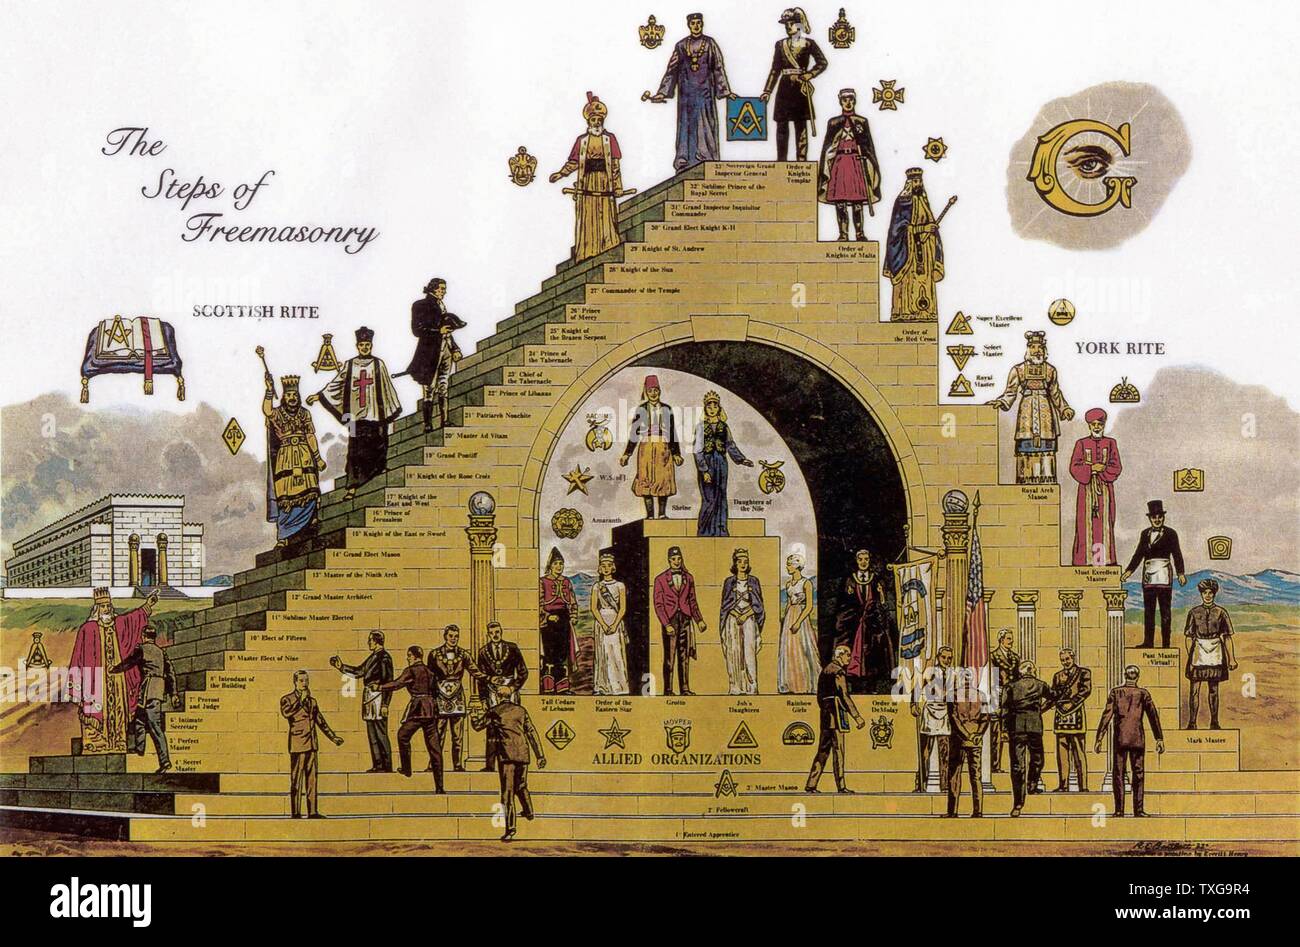 The steps of Freemasonry, a 20th century outline of the hierarchy of Freemasonry. Stock Photo